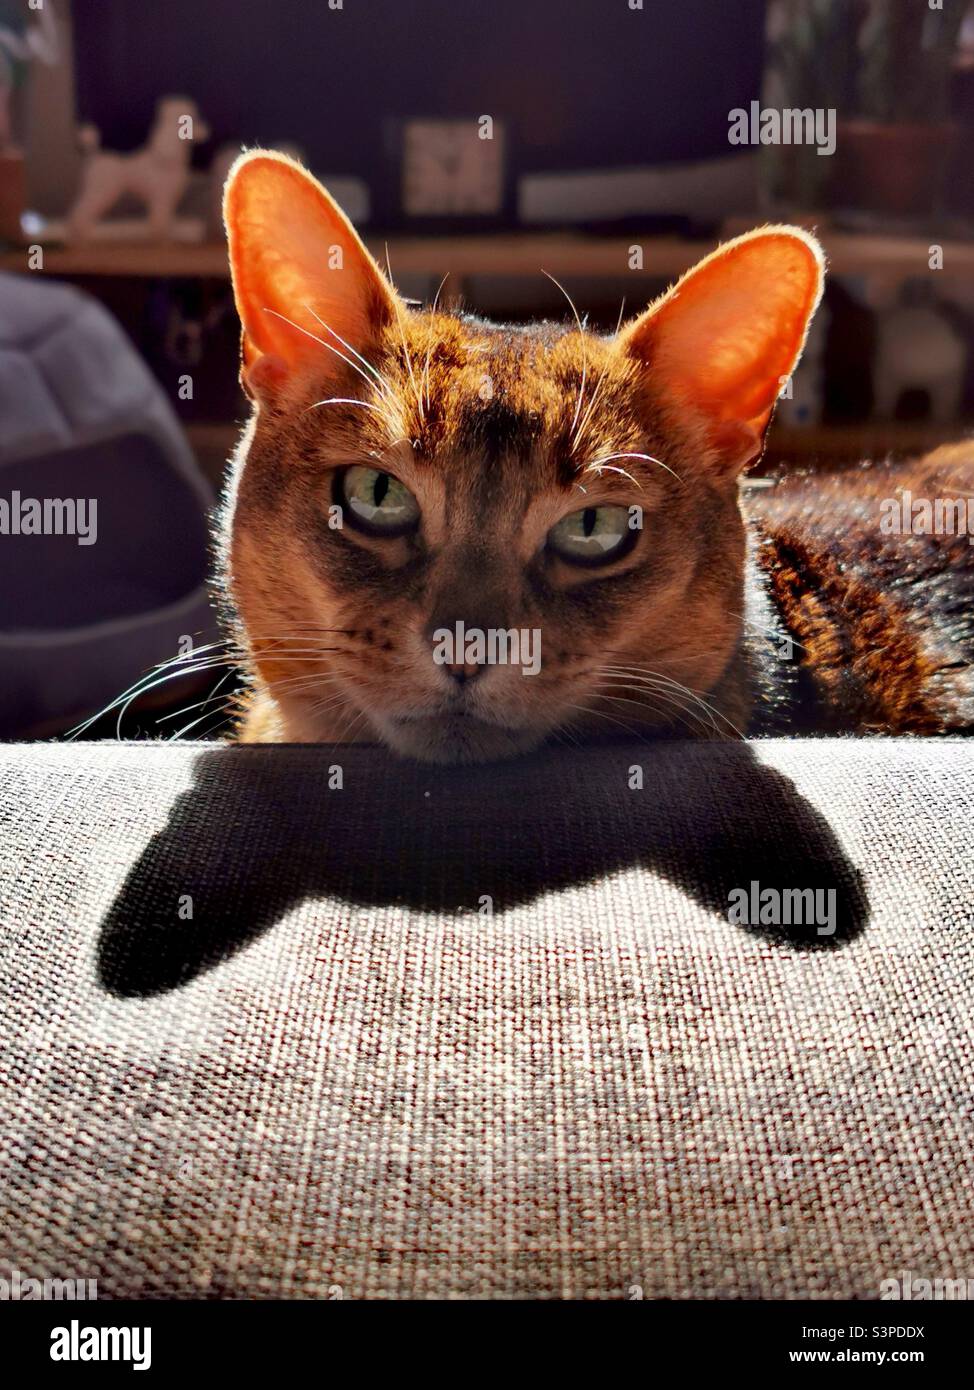 Abyssinian cat lying on grey couch casting a shadow Stock Photo